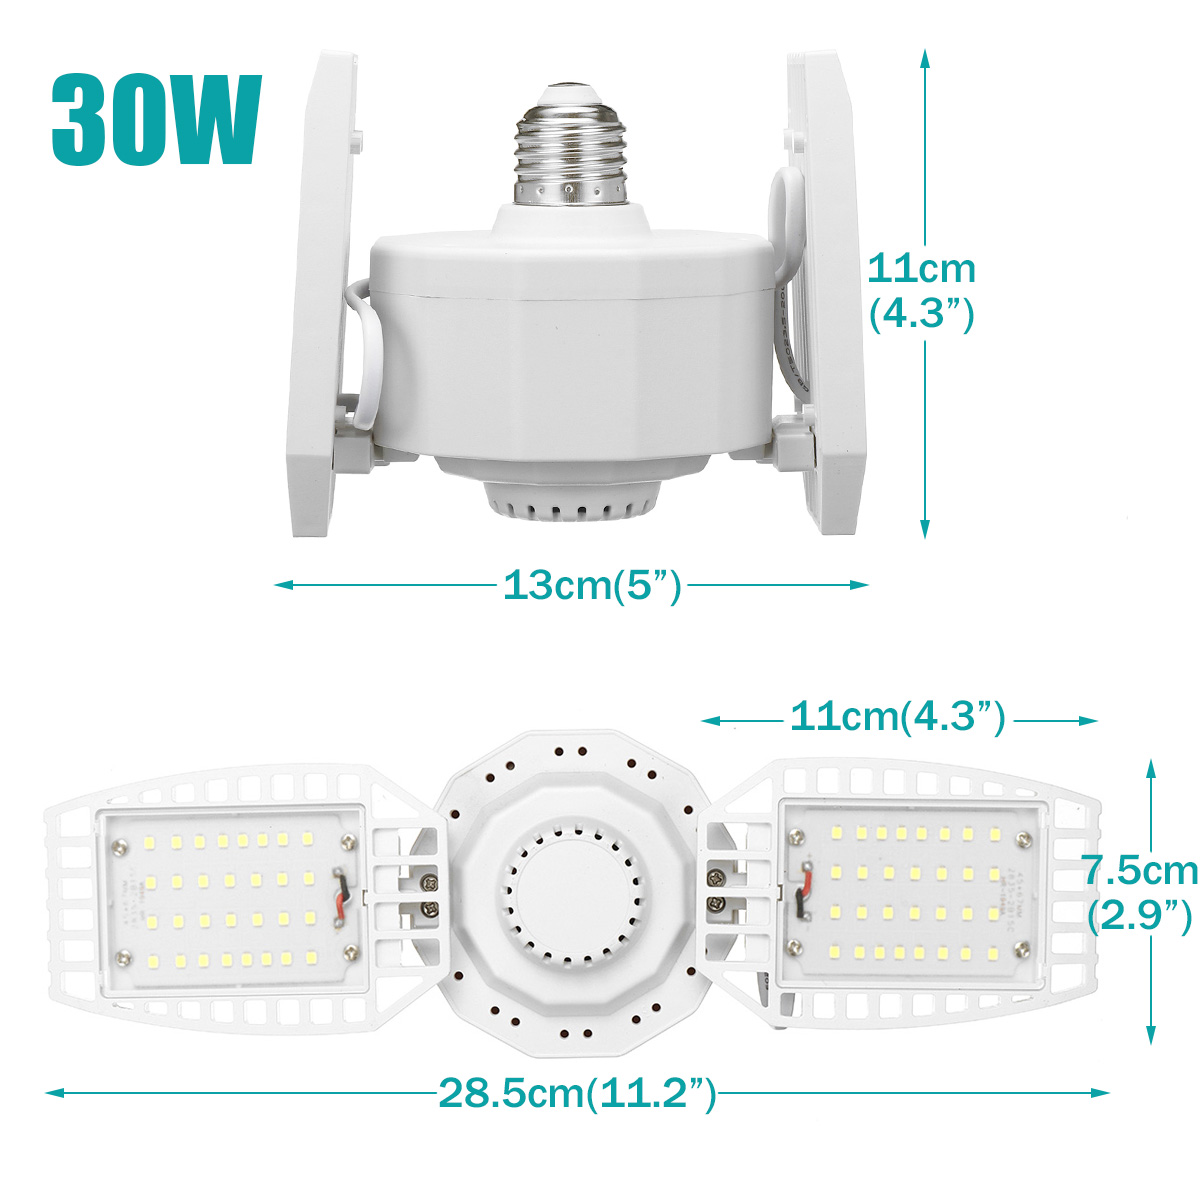 LED-Camping-Light-Adjustable-Folding-Ceiling-Fan-Blade-Lamp-Energy-Saving-Work-Lamp-Outdoor-Home-1836849-3